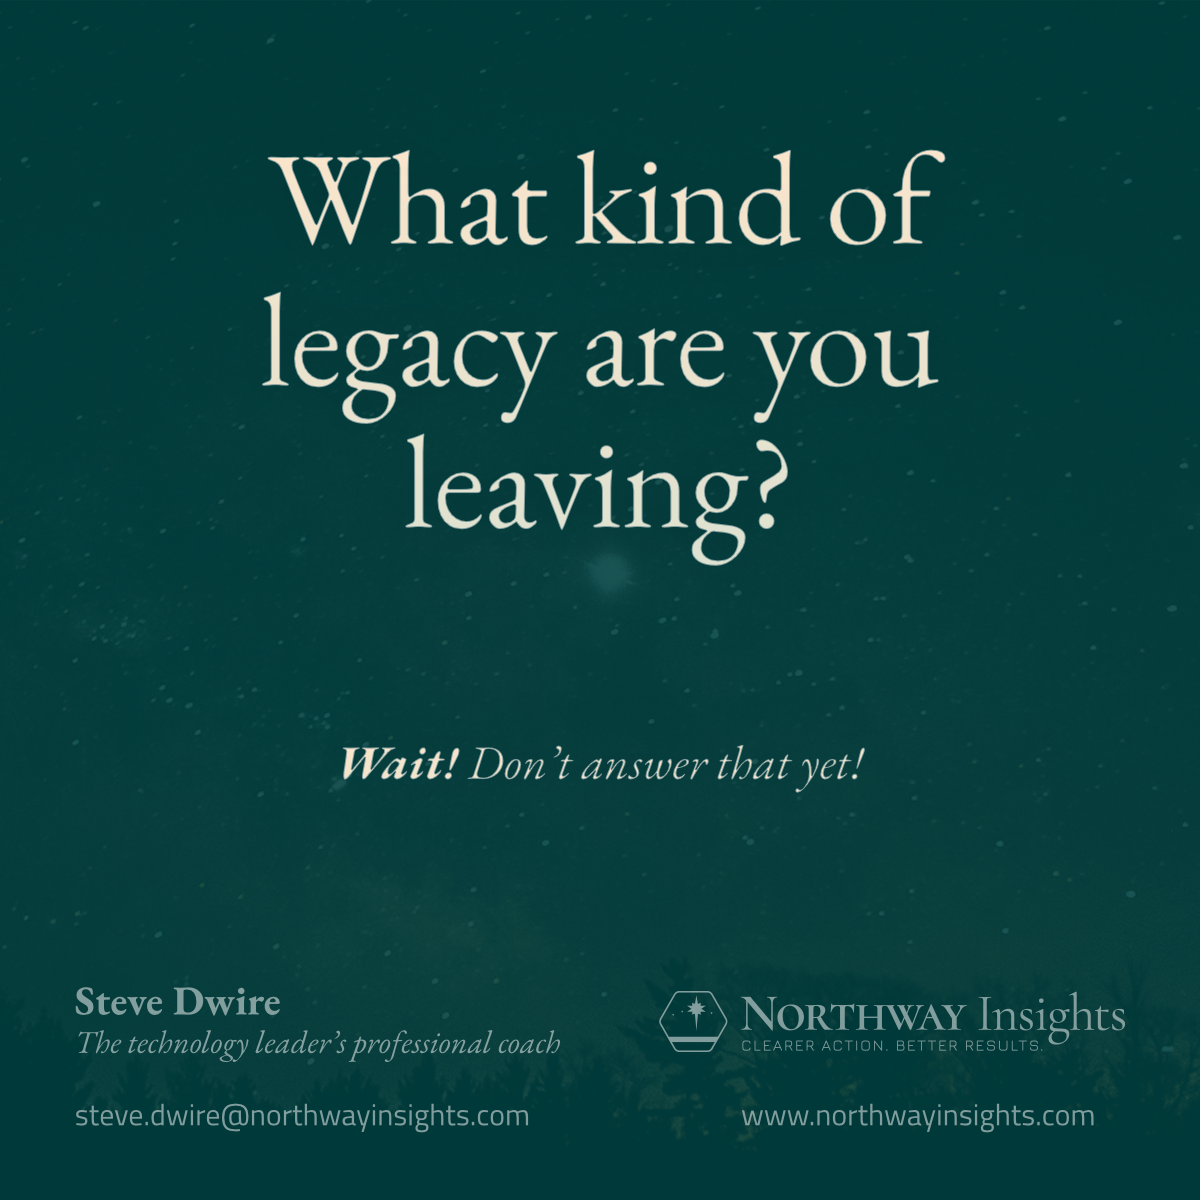 What kind of legacy are you leaving? (WAIT! Don't answer that yet!)